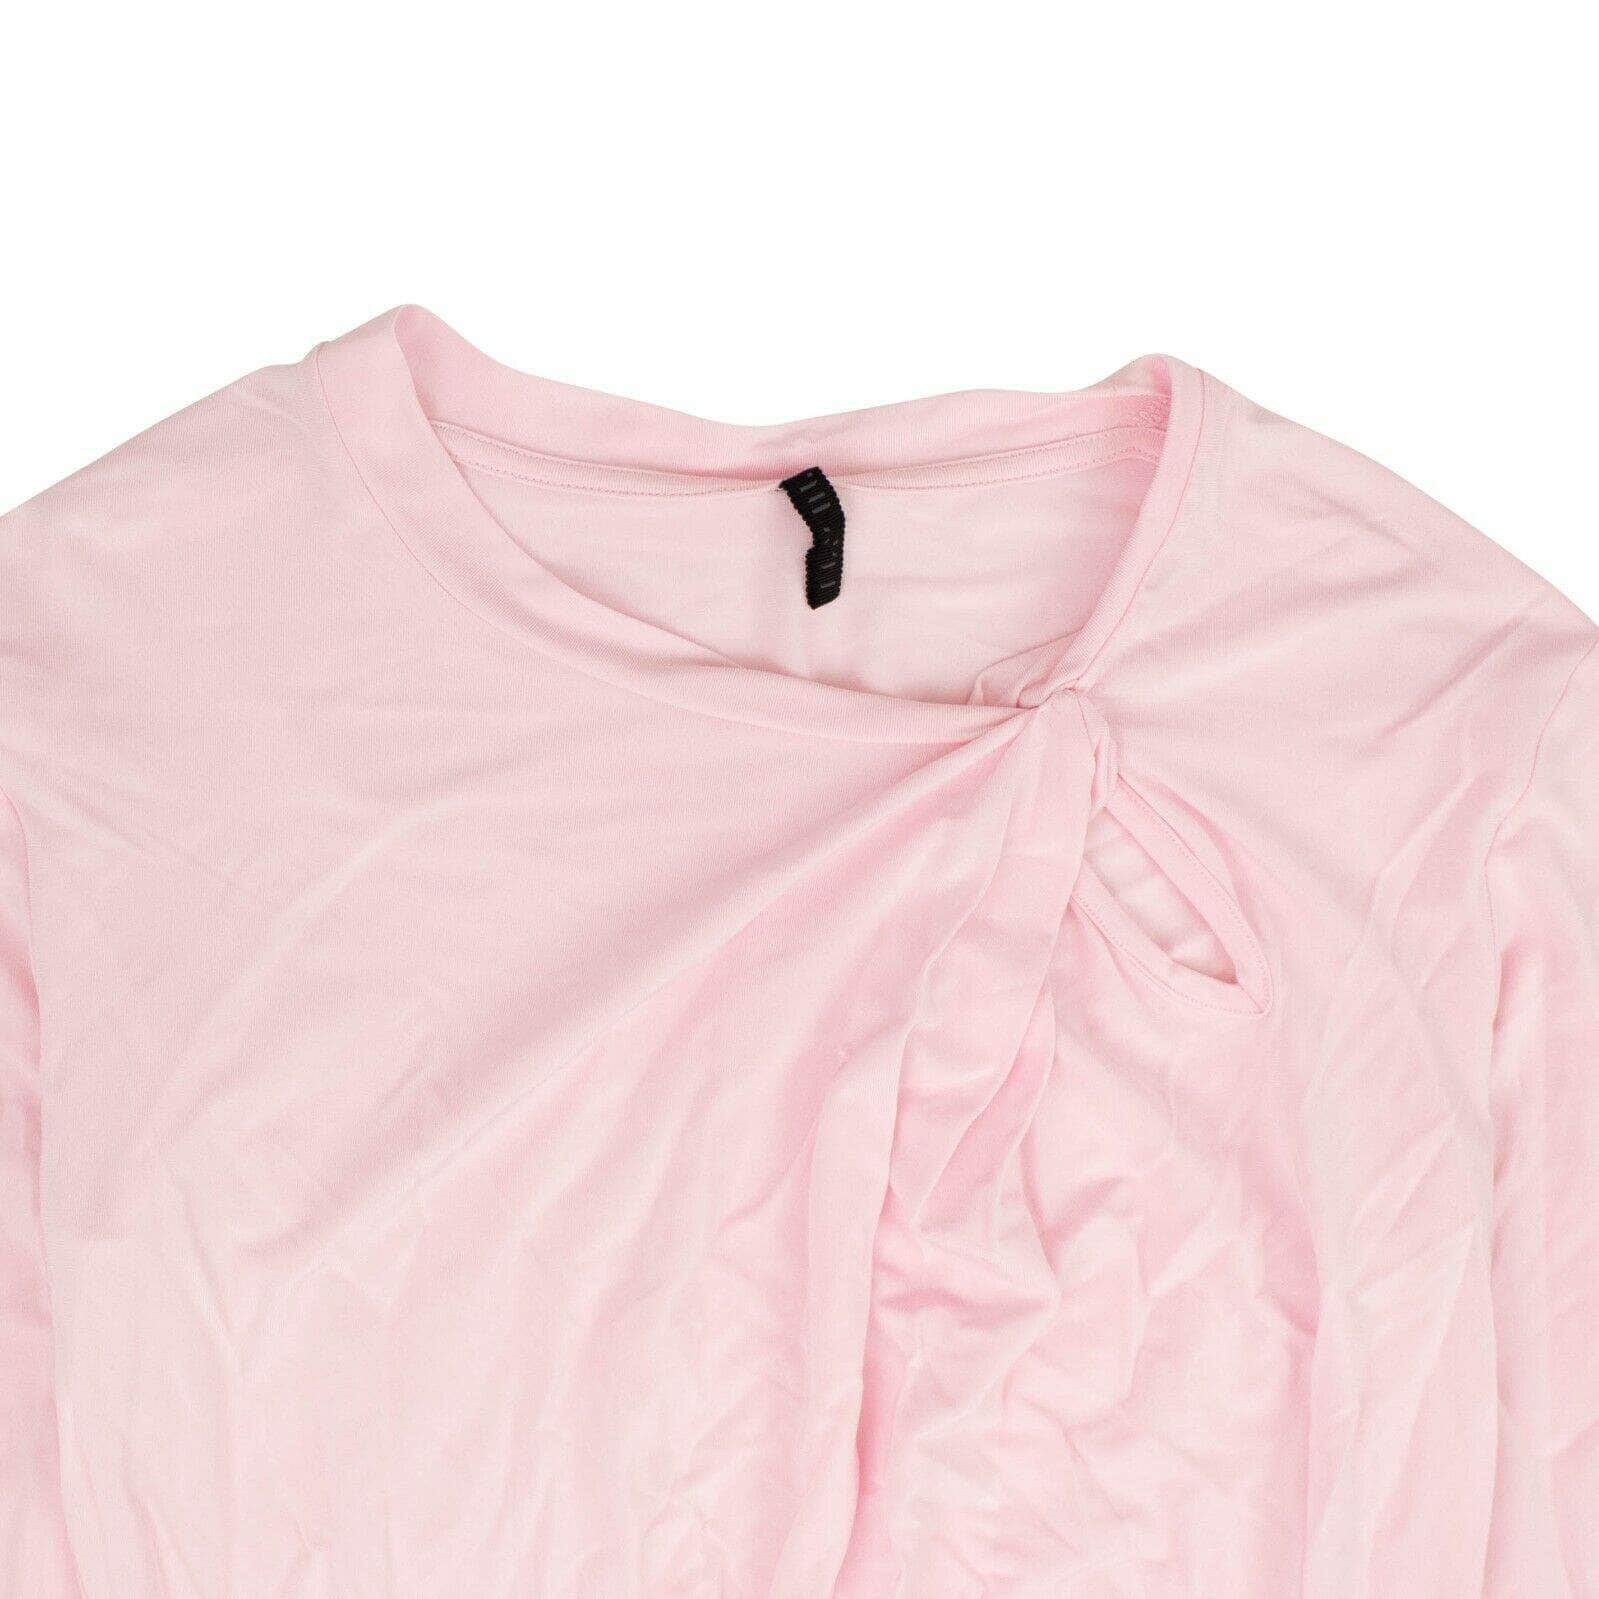 Unravel Project channelenable-all, chicmi, couponcollection, gender-womens, main-clothing, size-s, uncategorized, under-250, unravel-project S Pink Twist Top 82NGG-UN-1061/S 82NGG-UN-1061/S